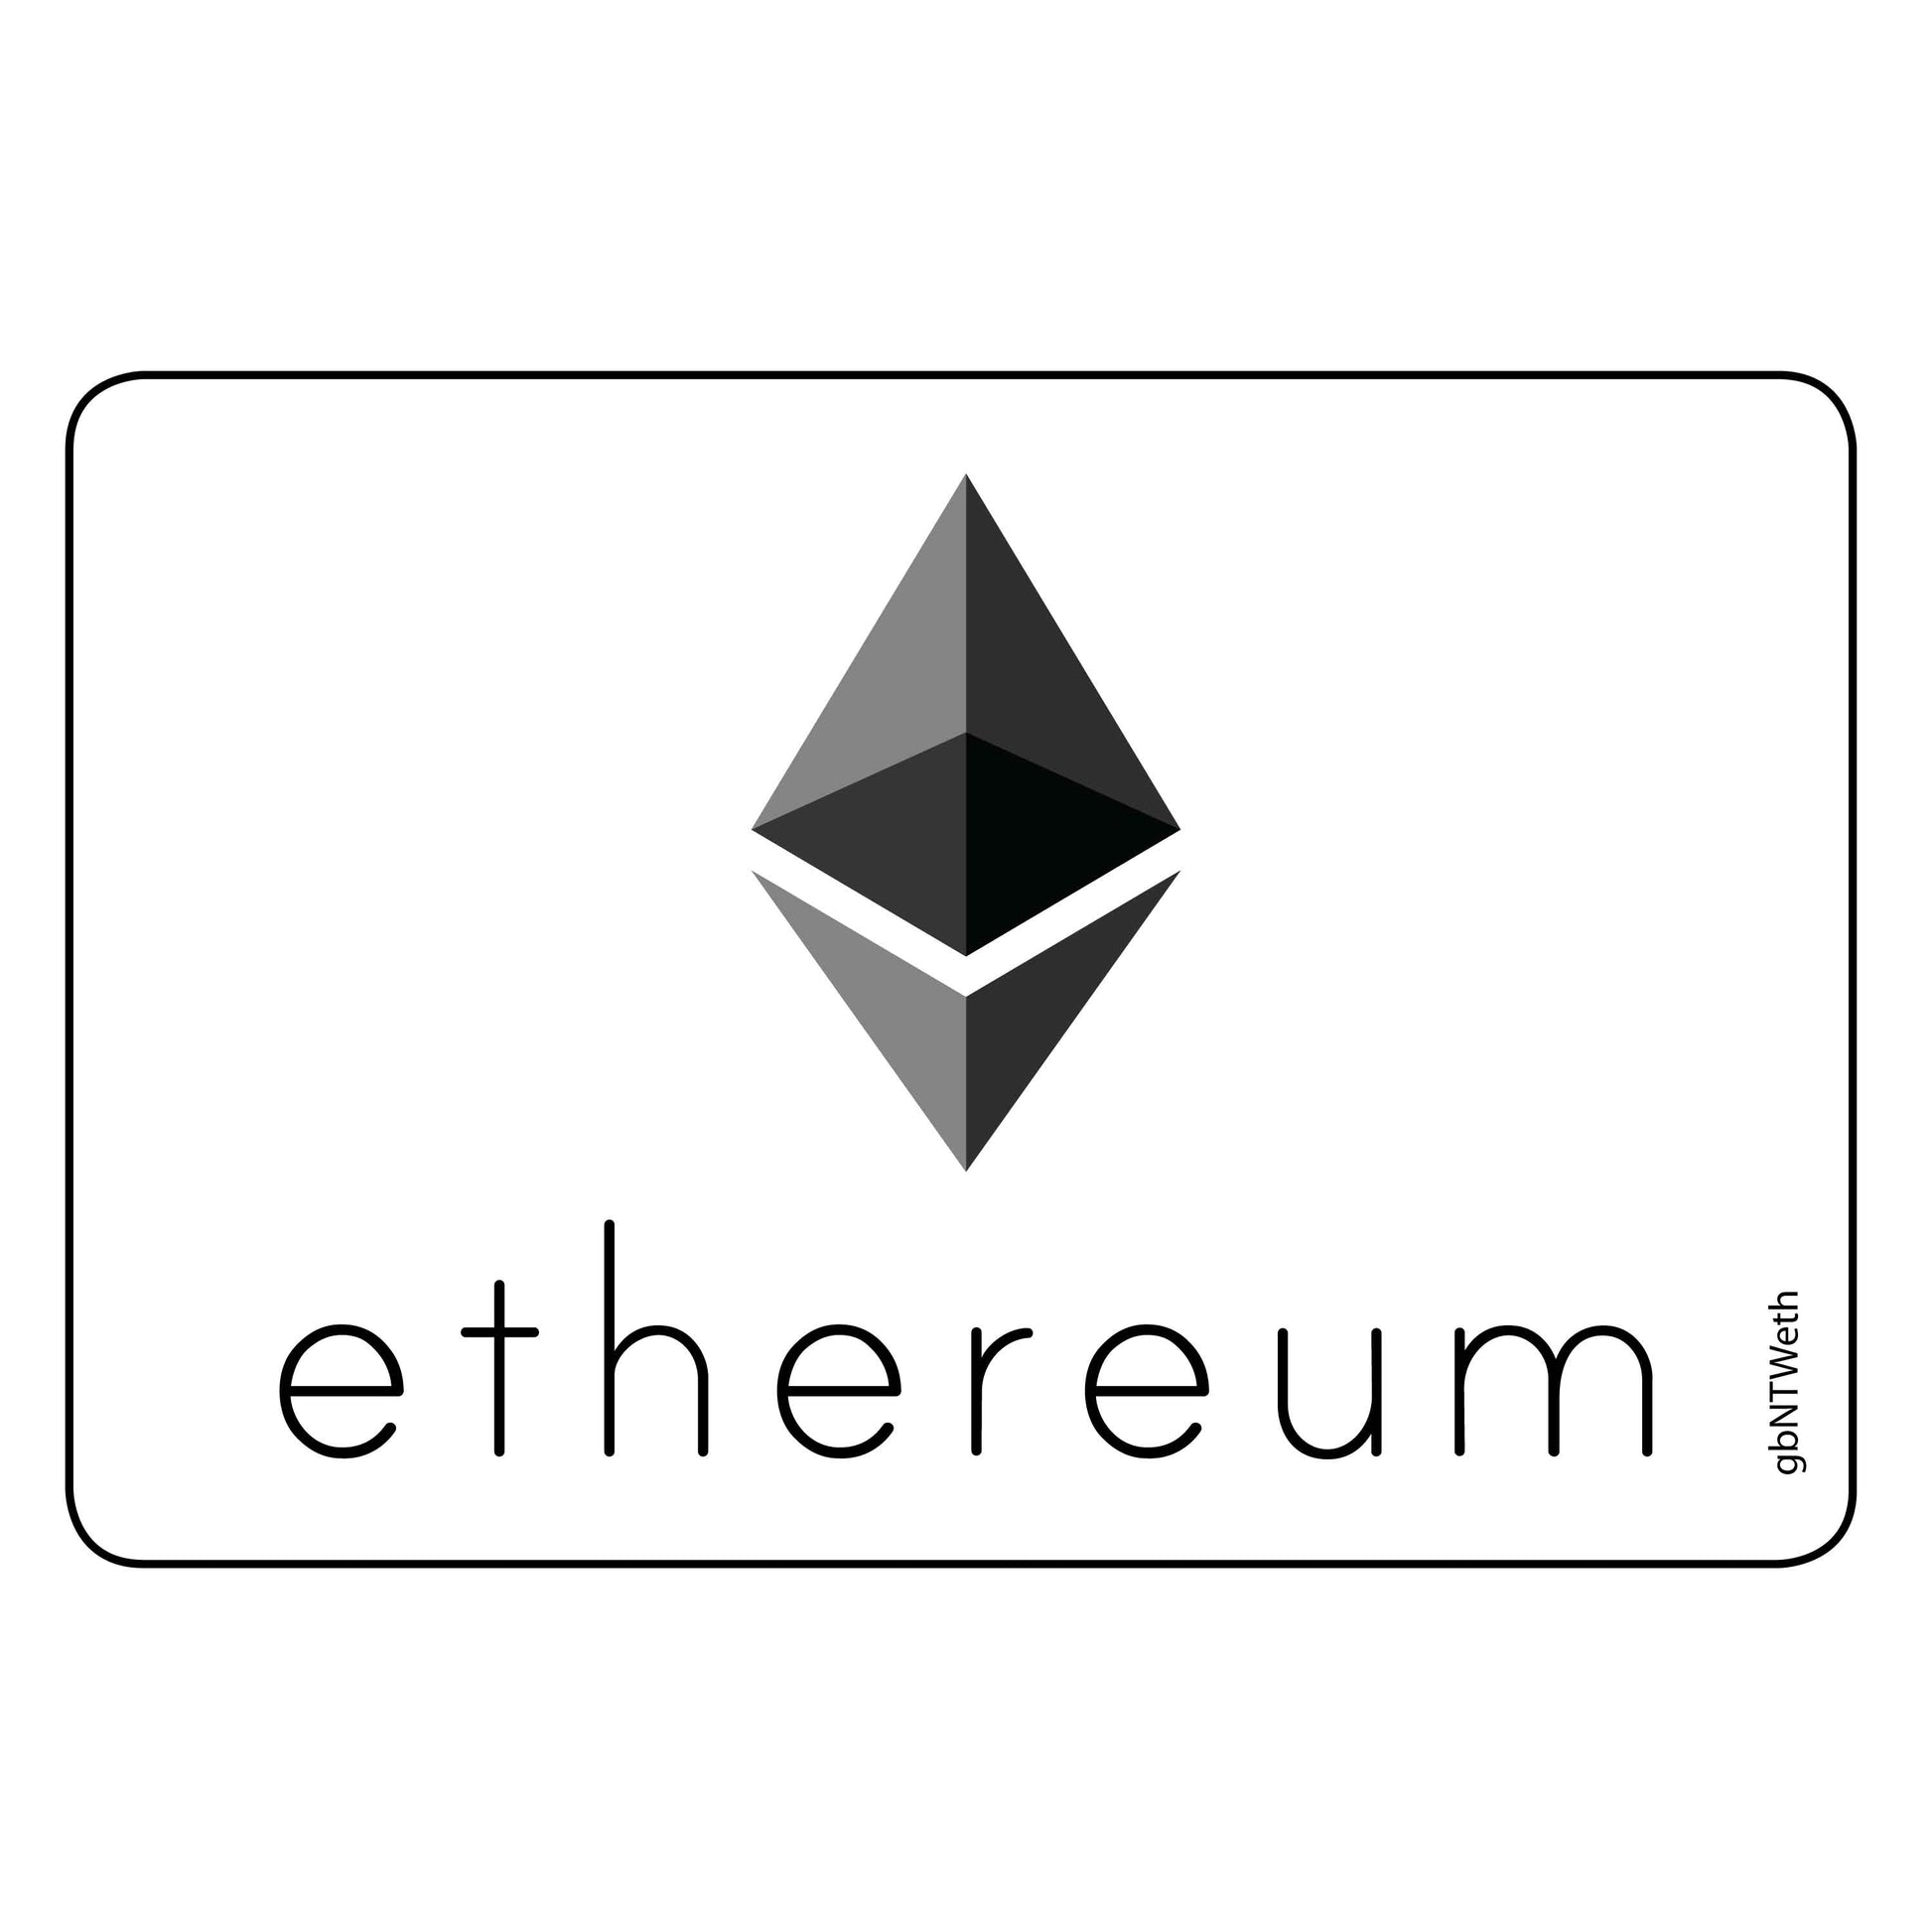 Single Network Decal, Ethereum. 3 inches by 2 inches in size. 